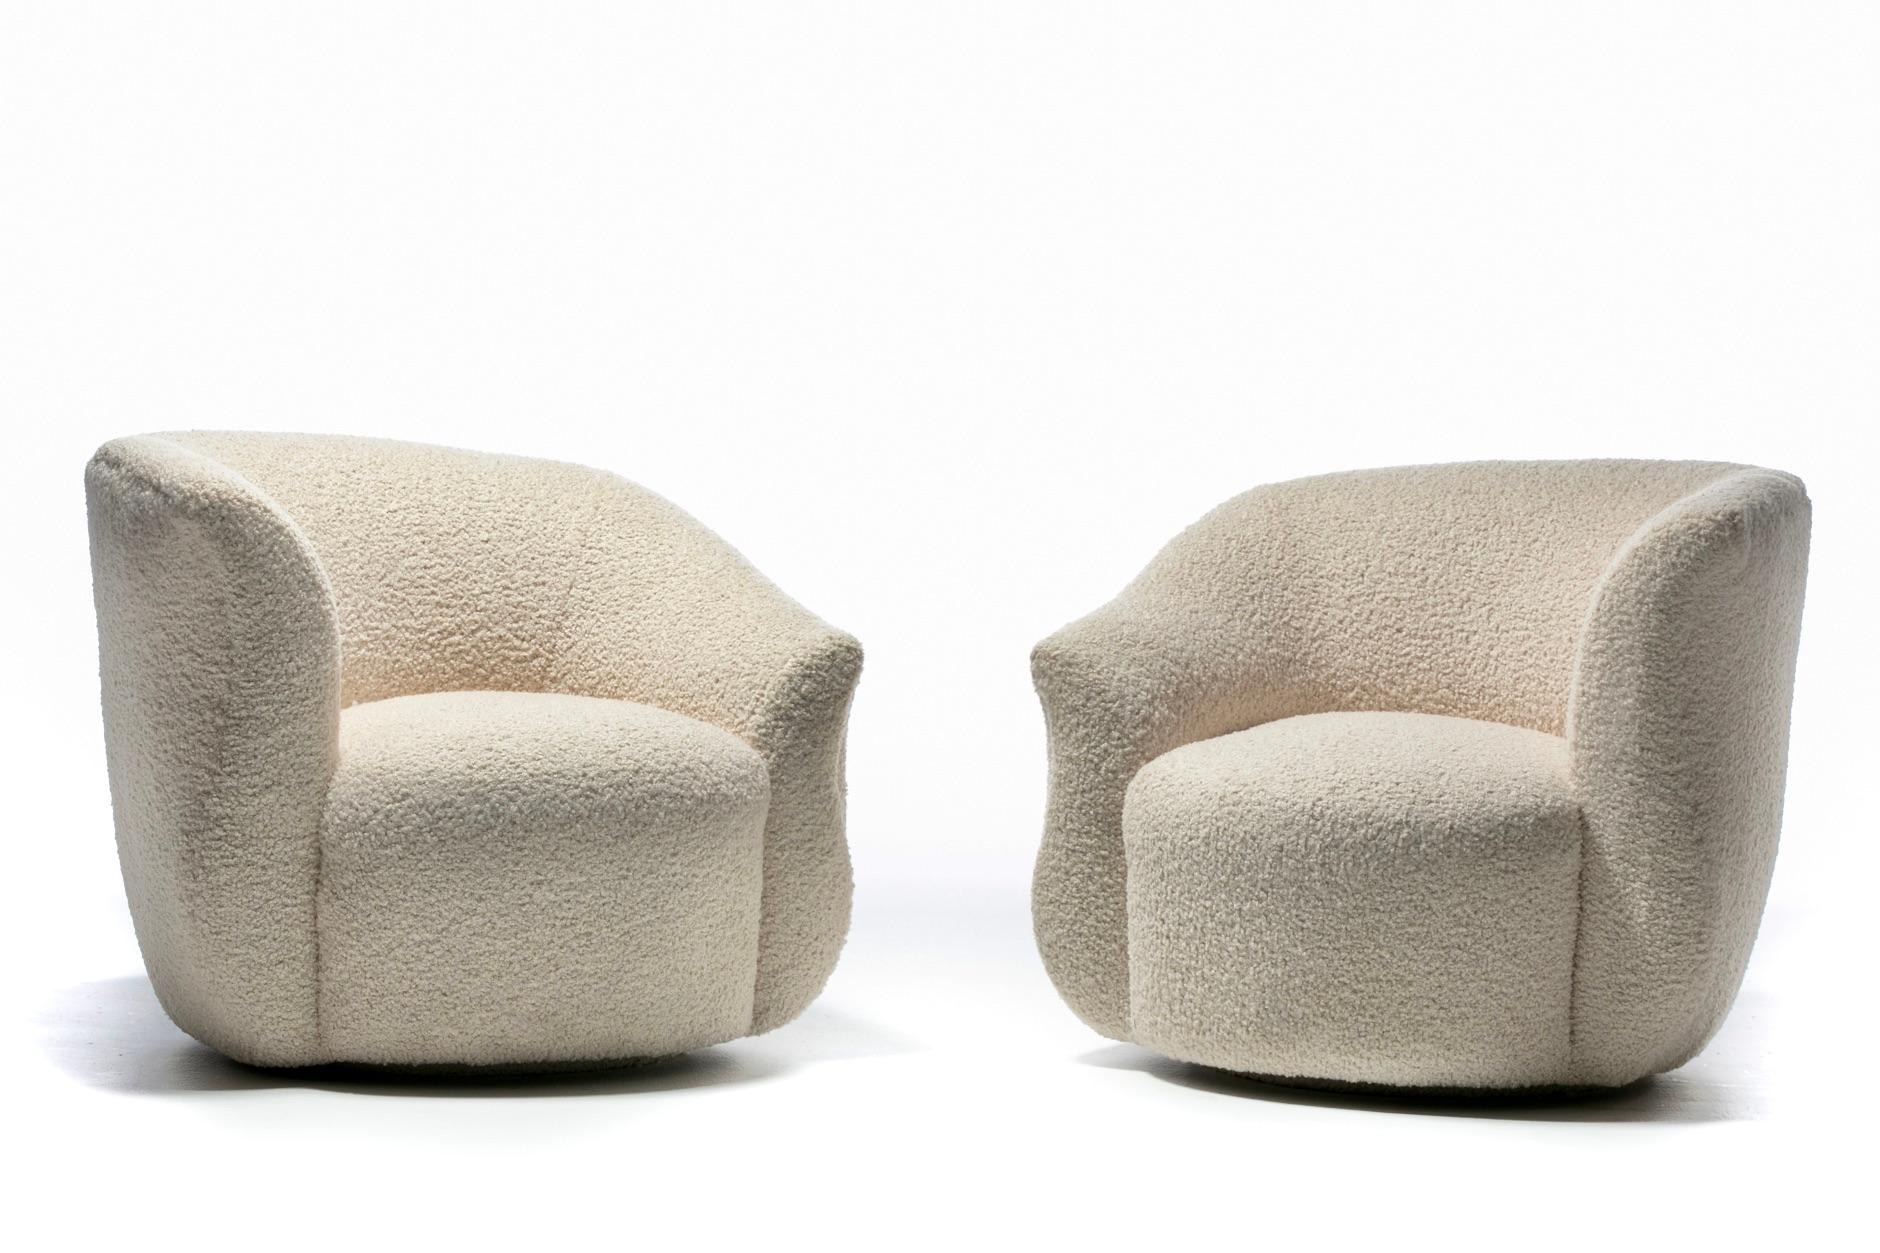 Late 20th Century Pair of Post Modern Swivel Chairs & Swivel Top Ottoman in Ivory White Bouclé